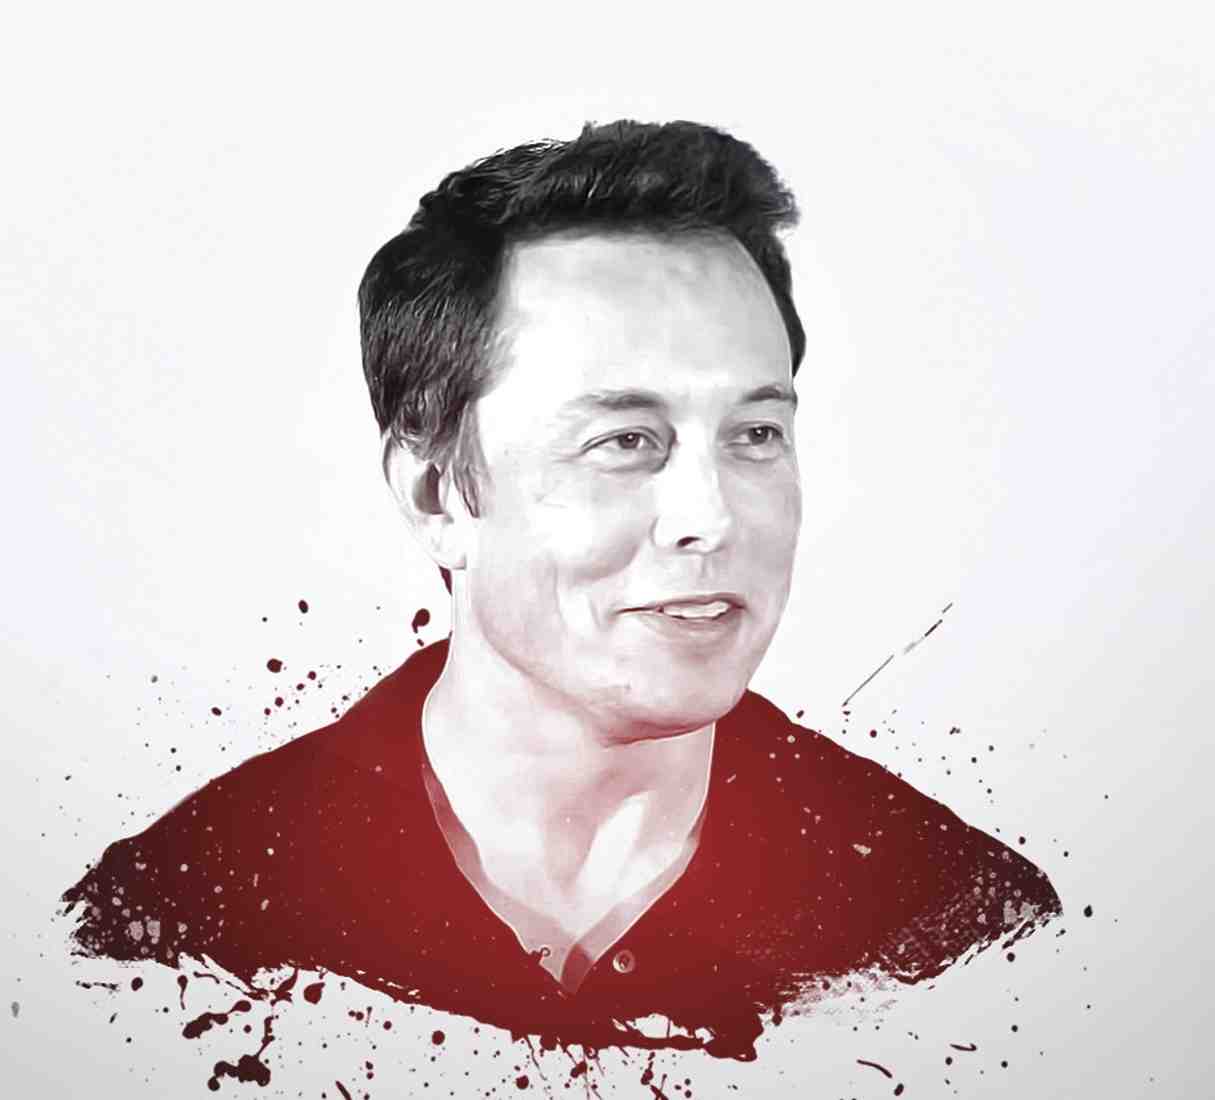 Elon Musk. I Think It Is Possible For Ordinary People To Choose To Be Extraordinary. Portrait Picture.